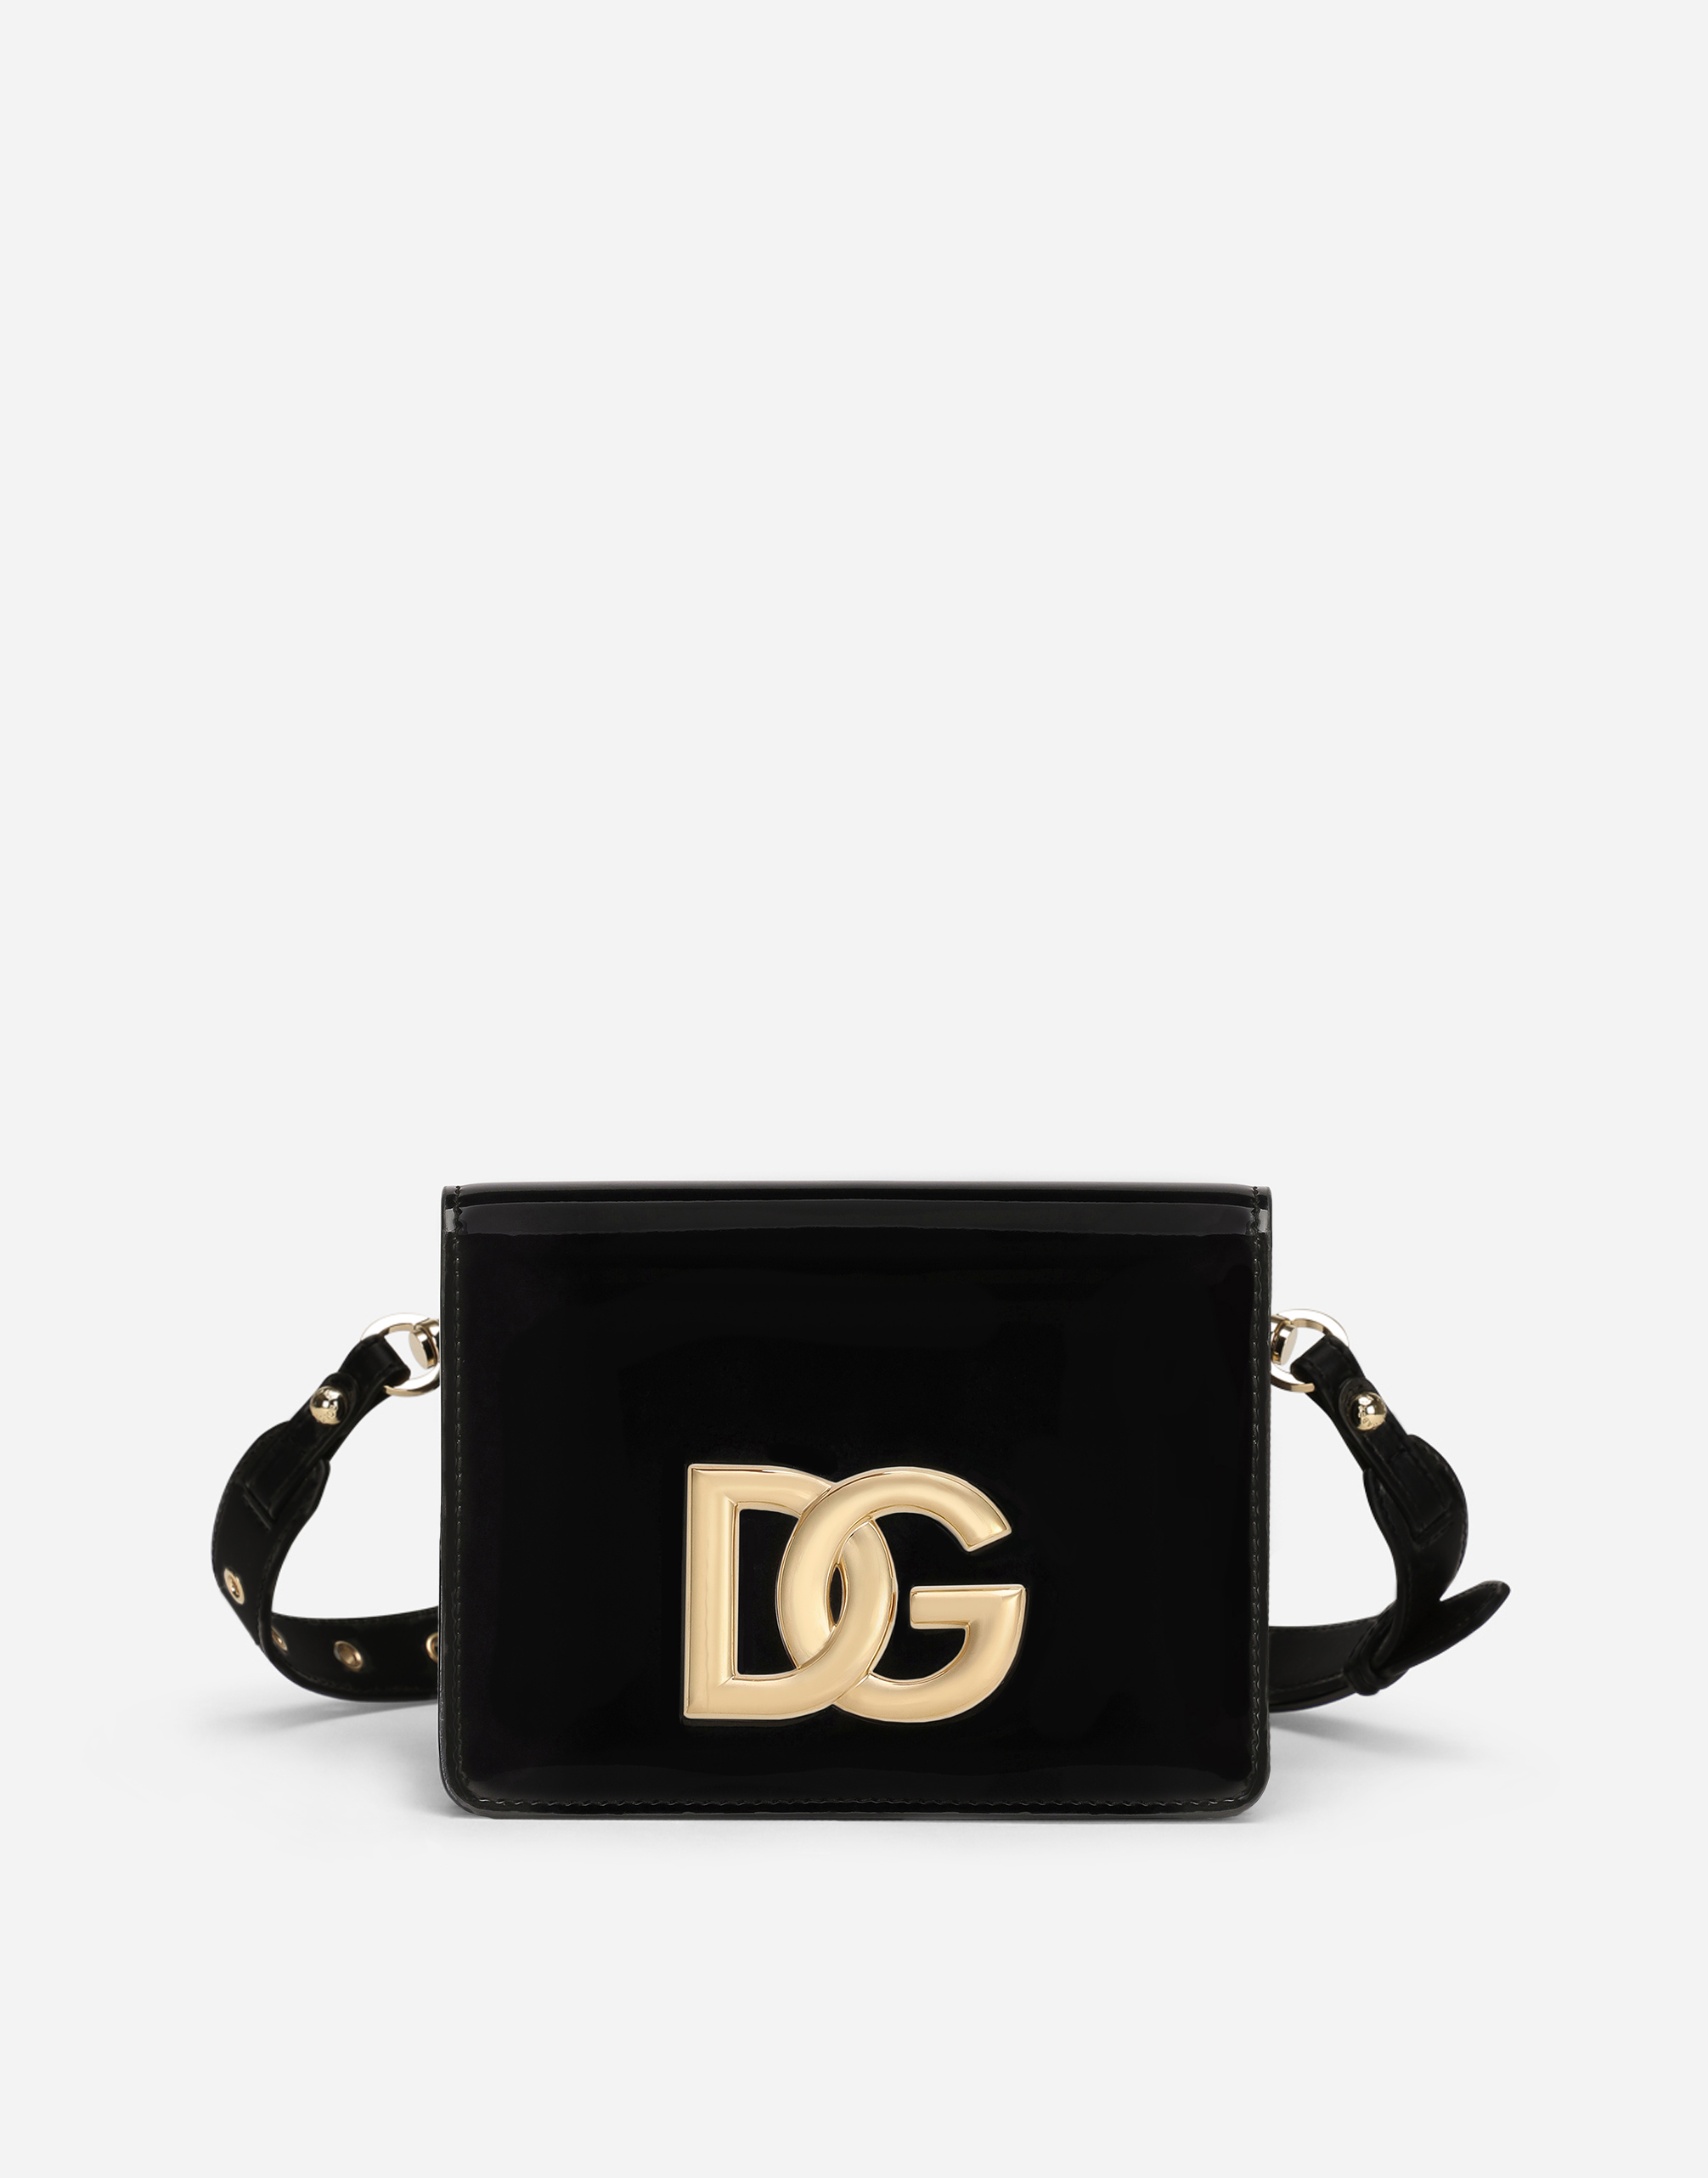 Patent leather 3.5 crossbody bag in Black